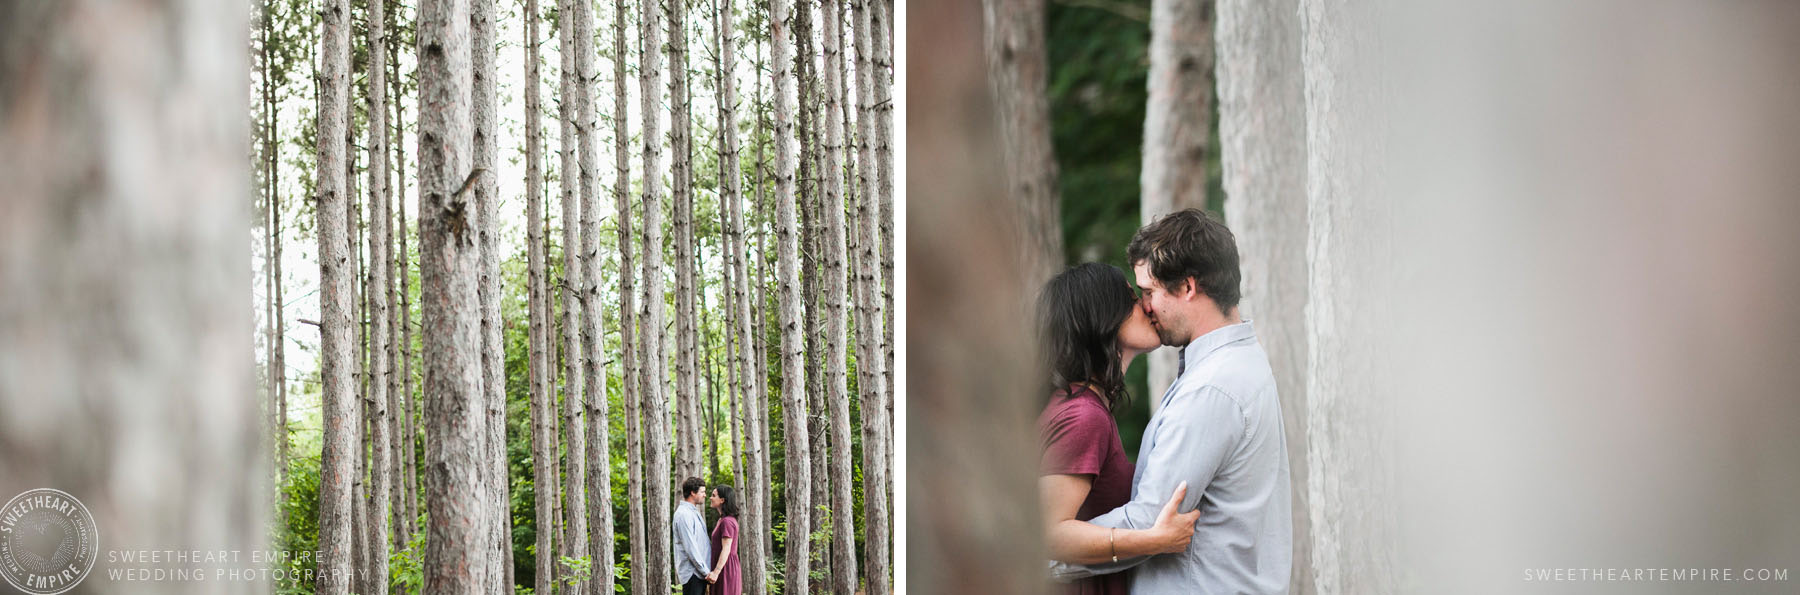 Cottage Country Engagement_02